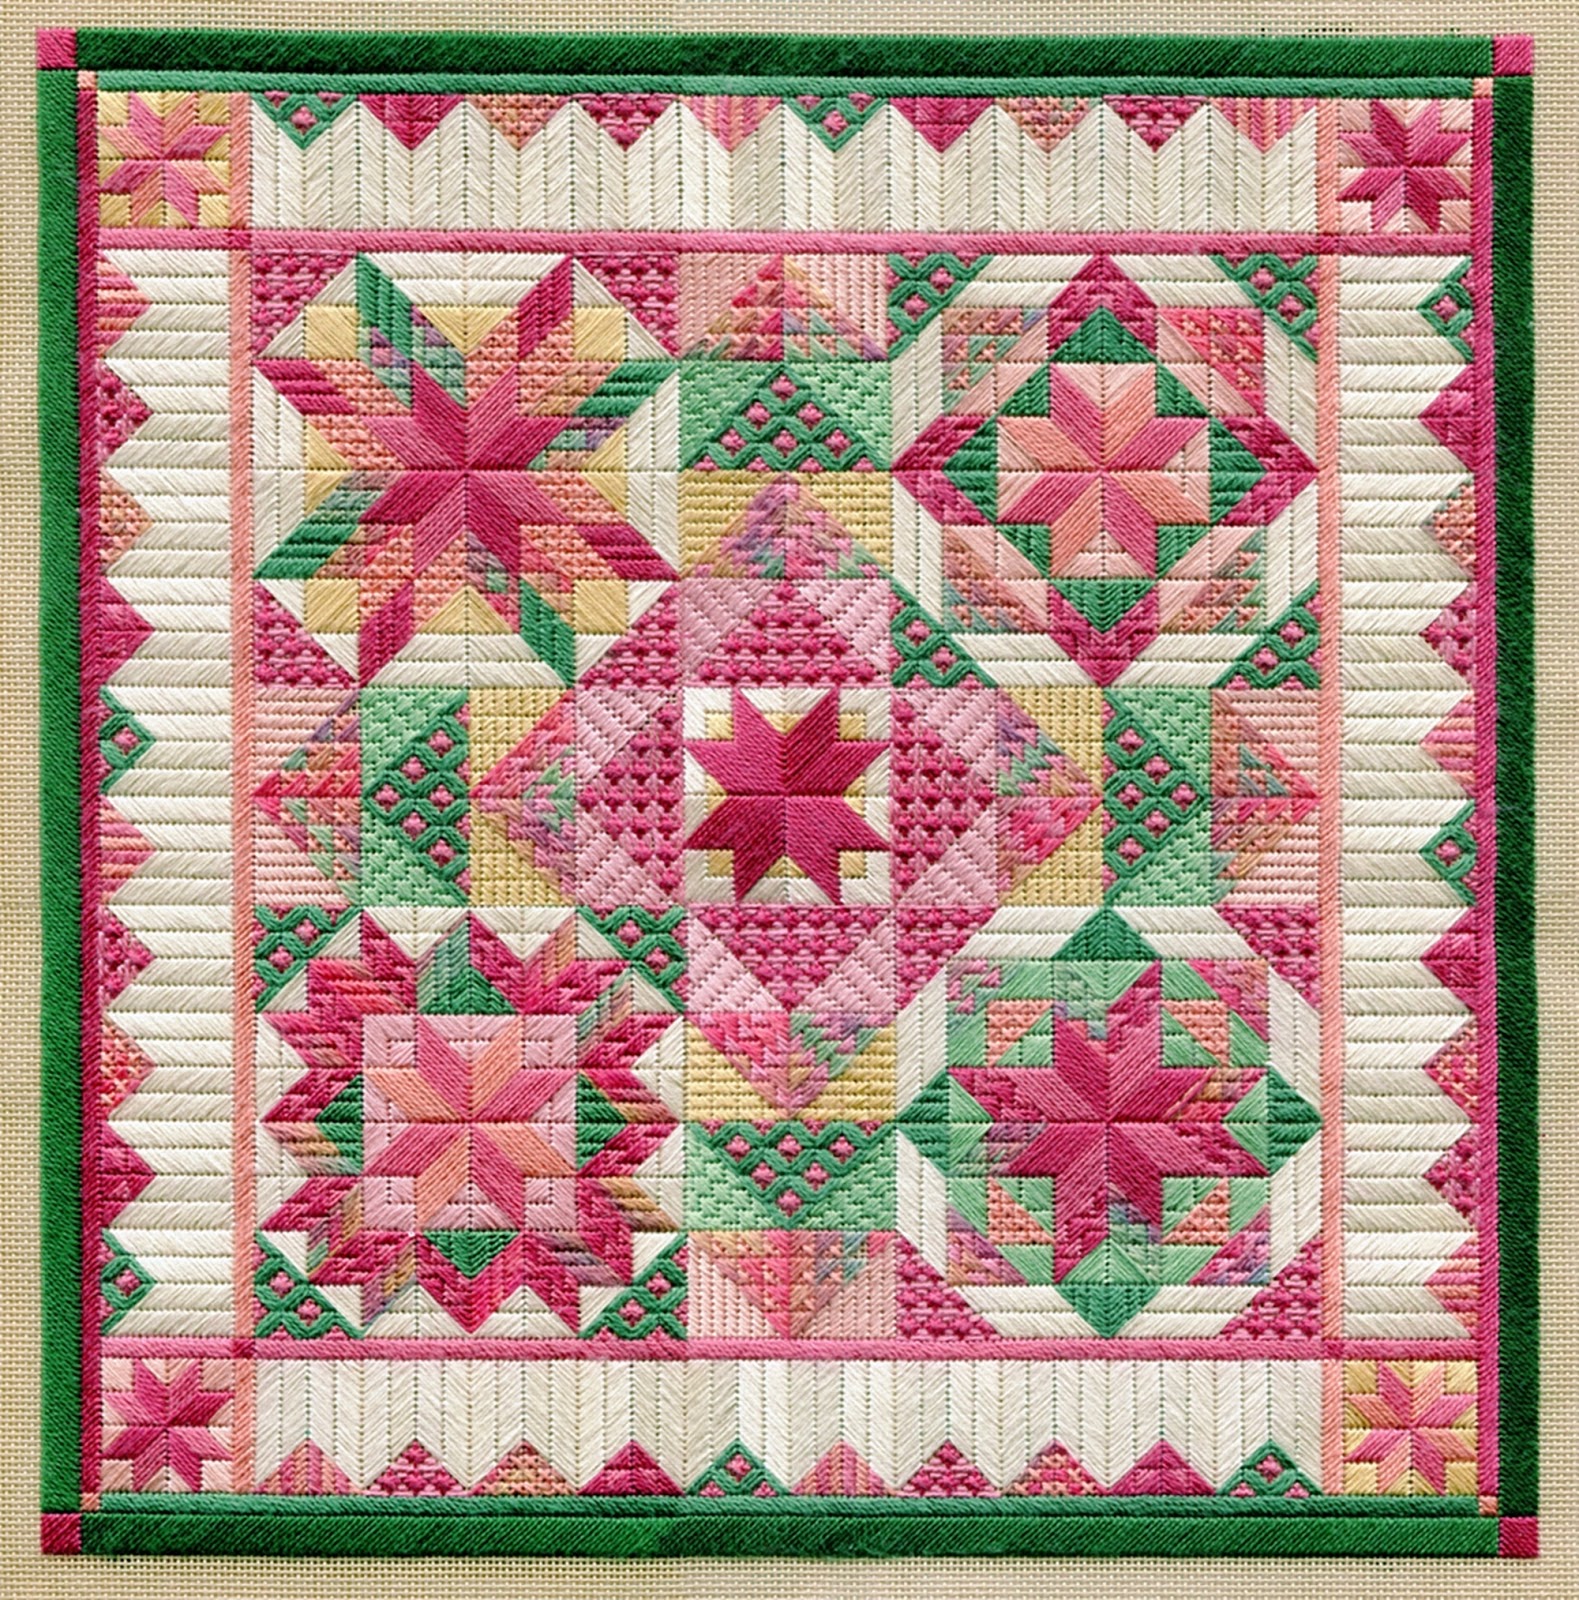 two-handed-stitcher-colorful-new-quilt-design